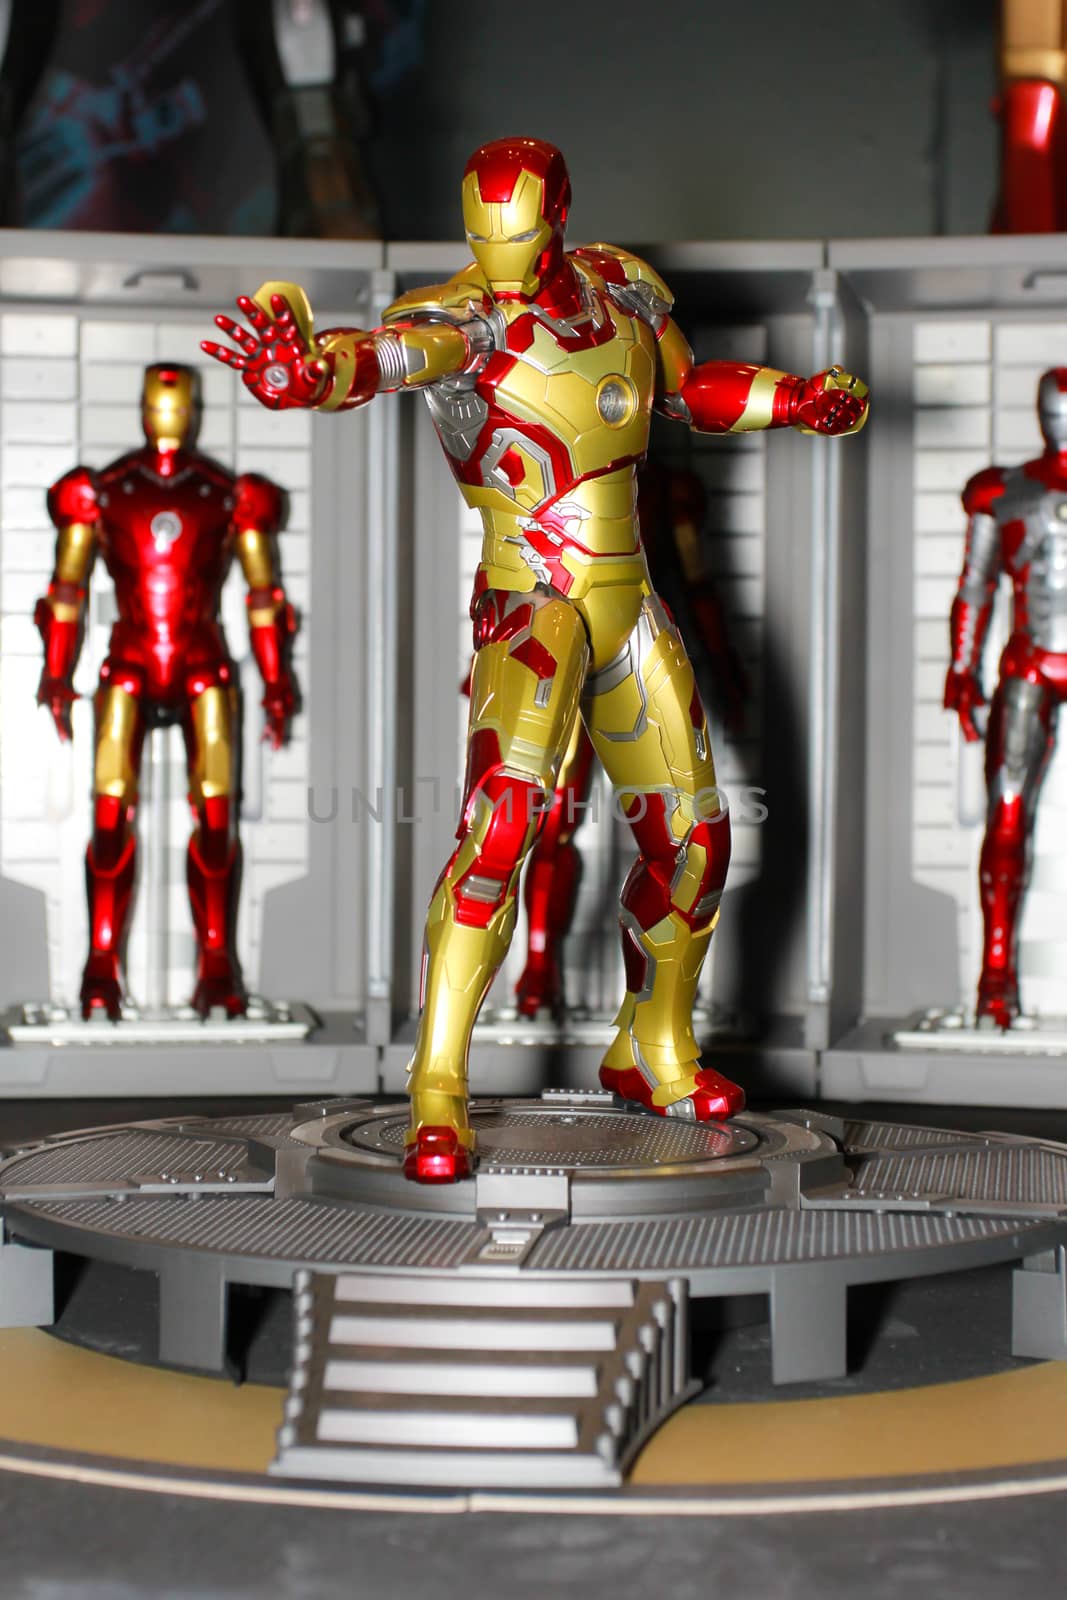 A model of the character Iron Man from the movies and comics 6 by redthirteen